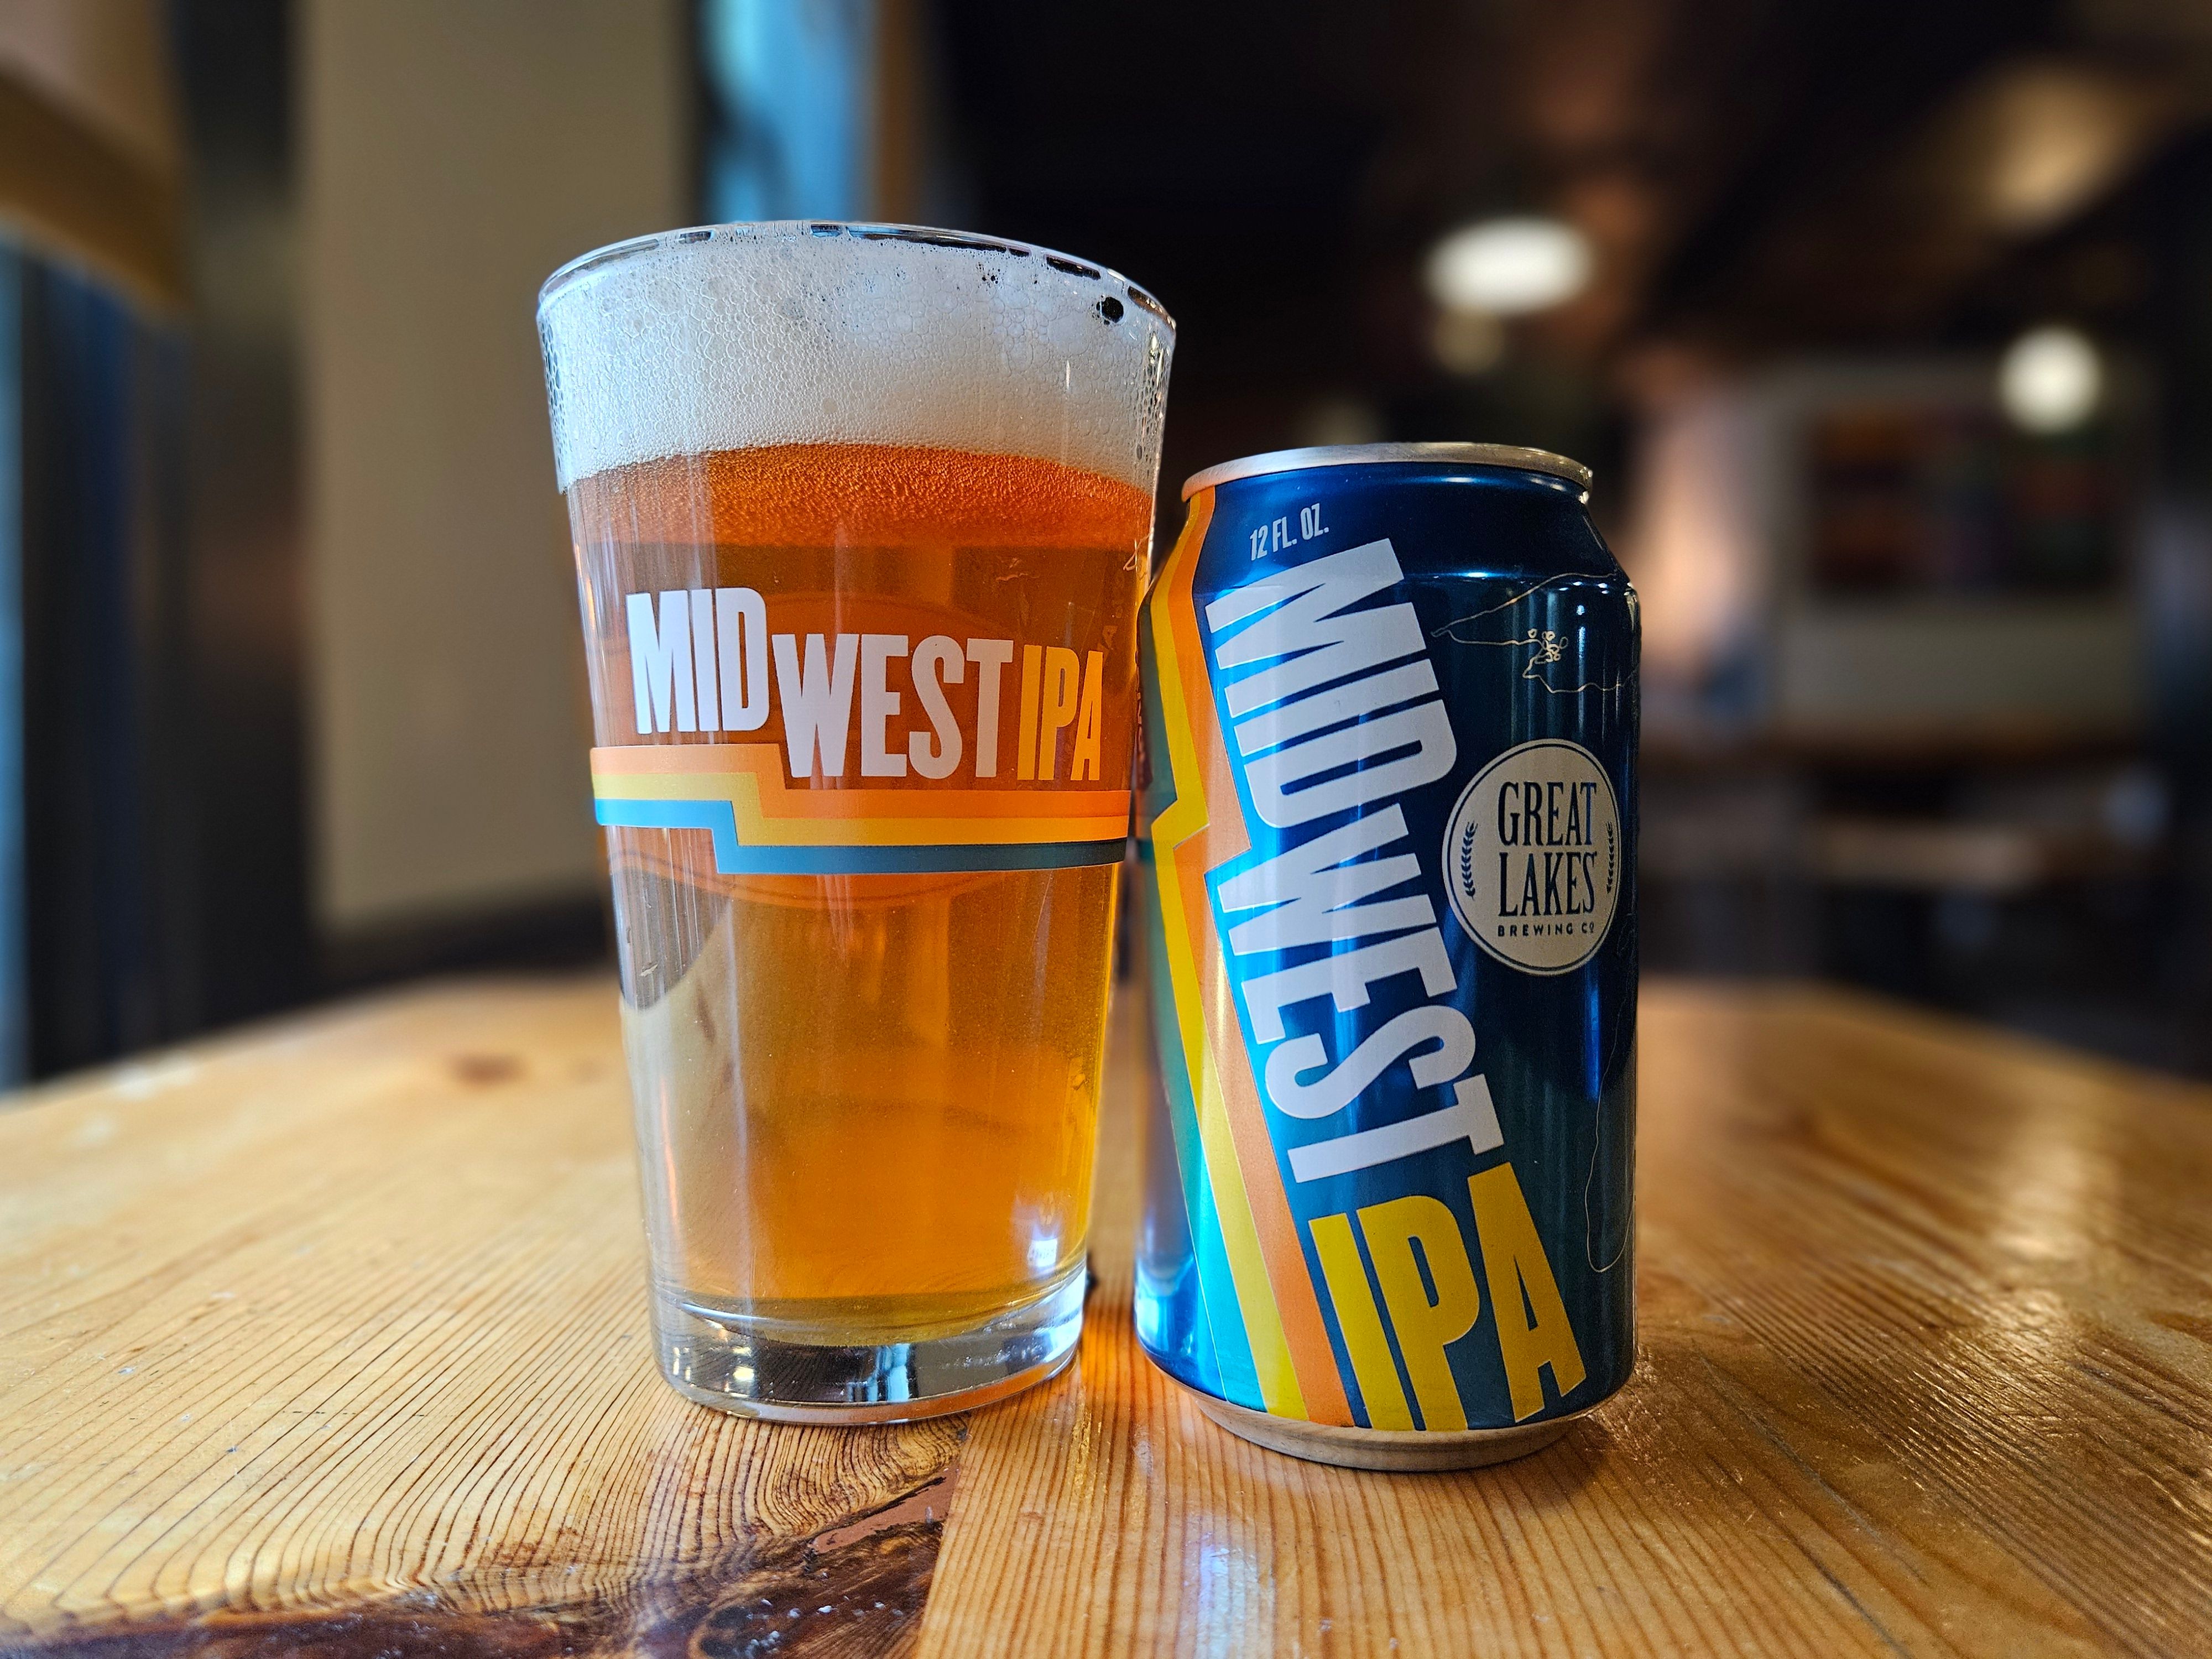 Midwest IPA: The Unofficial IPA of Midwest Nice